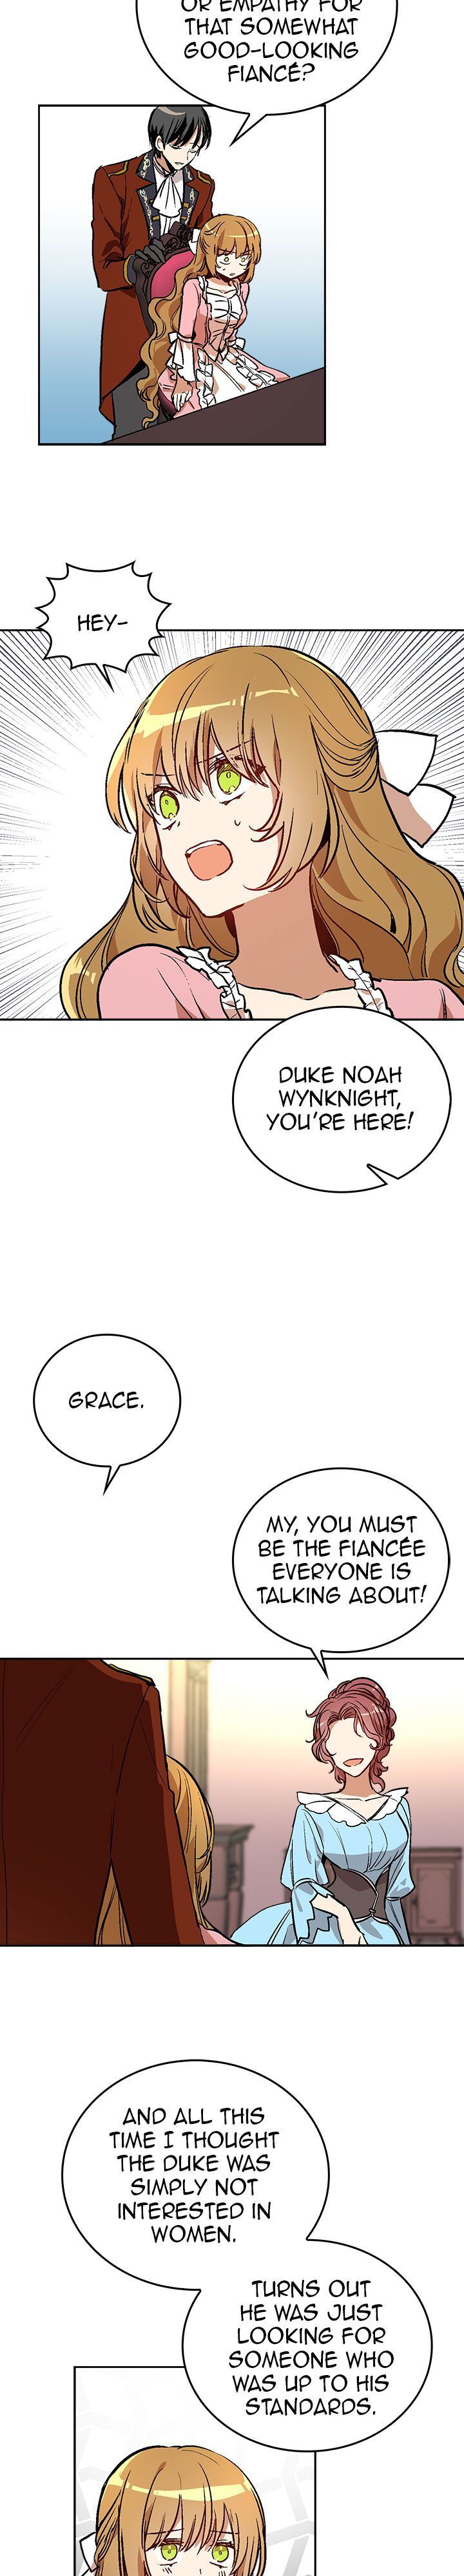 The Reason Why Raeliana Ended Up at the Duke's Mansion Chapter 044 page 9